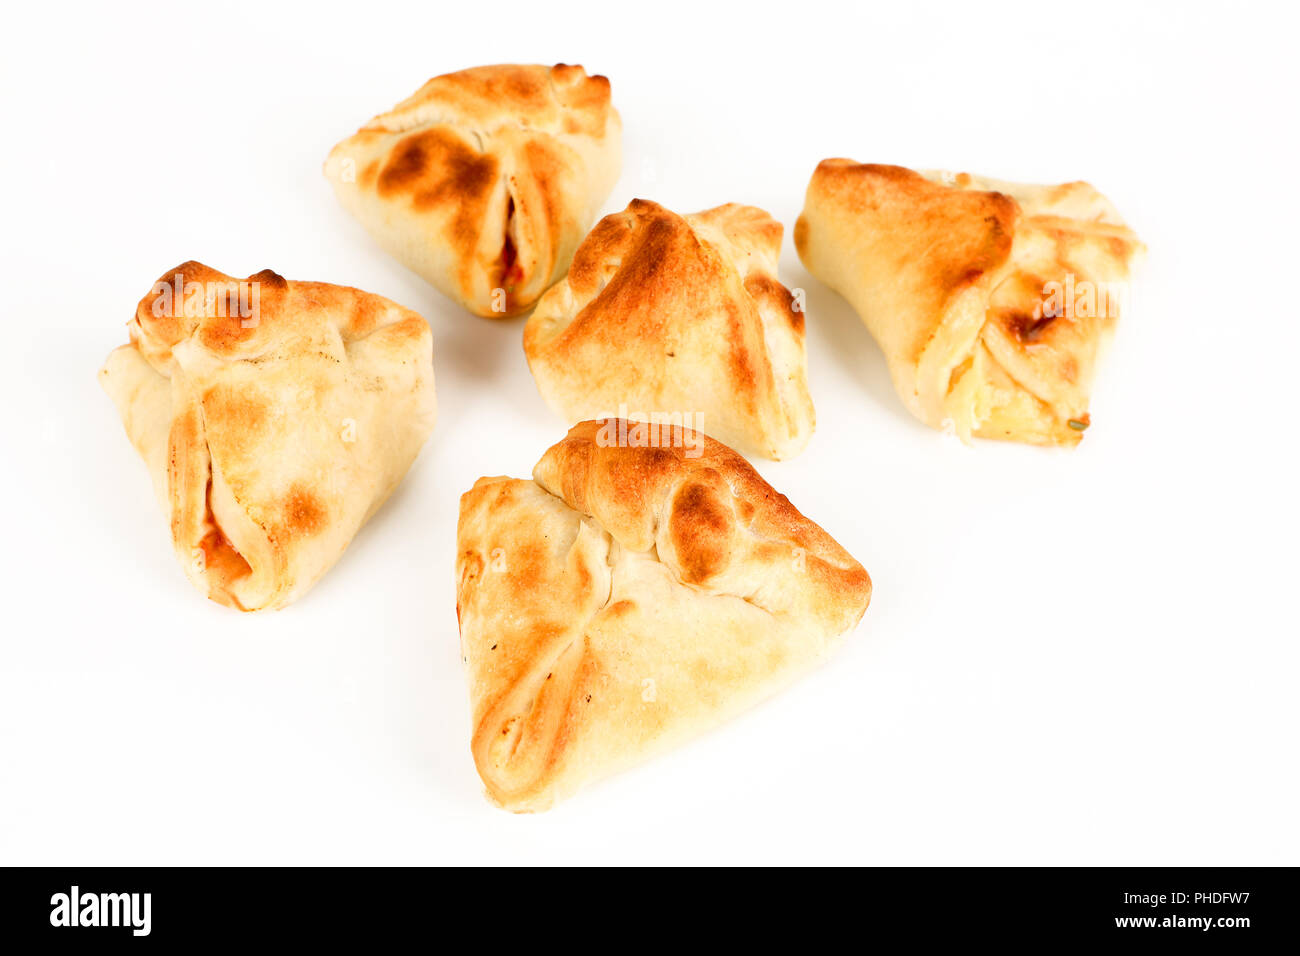 pizza rolls filled with cheese Stock Photo